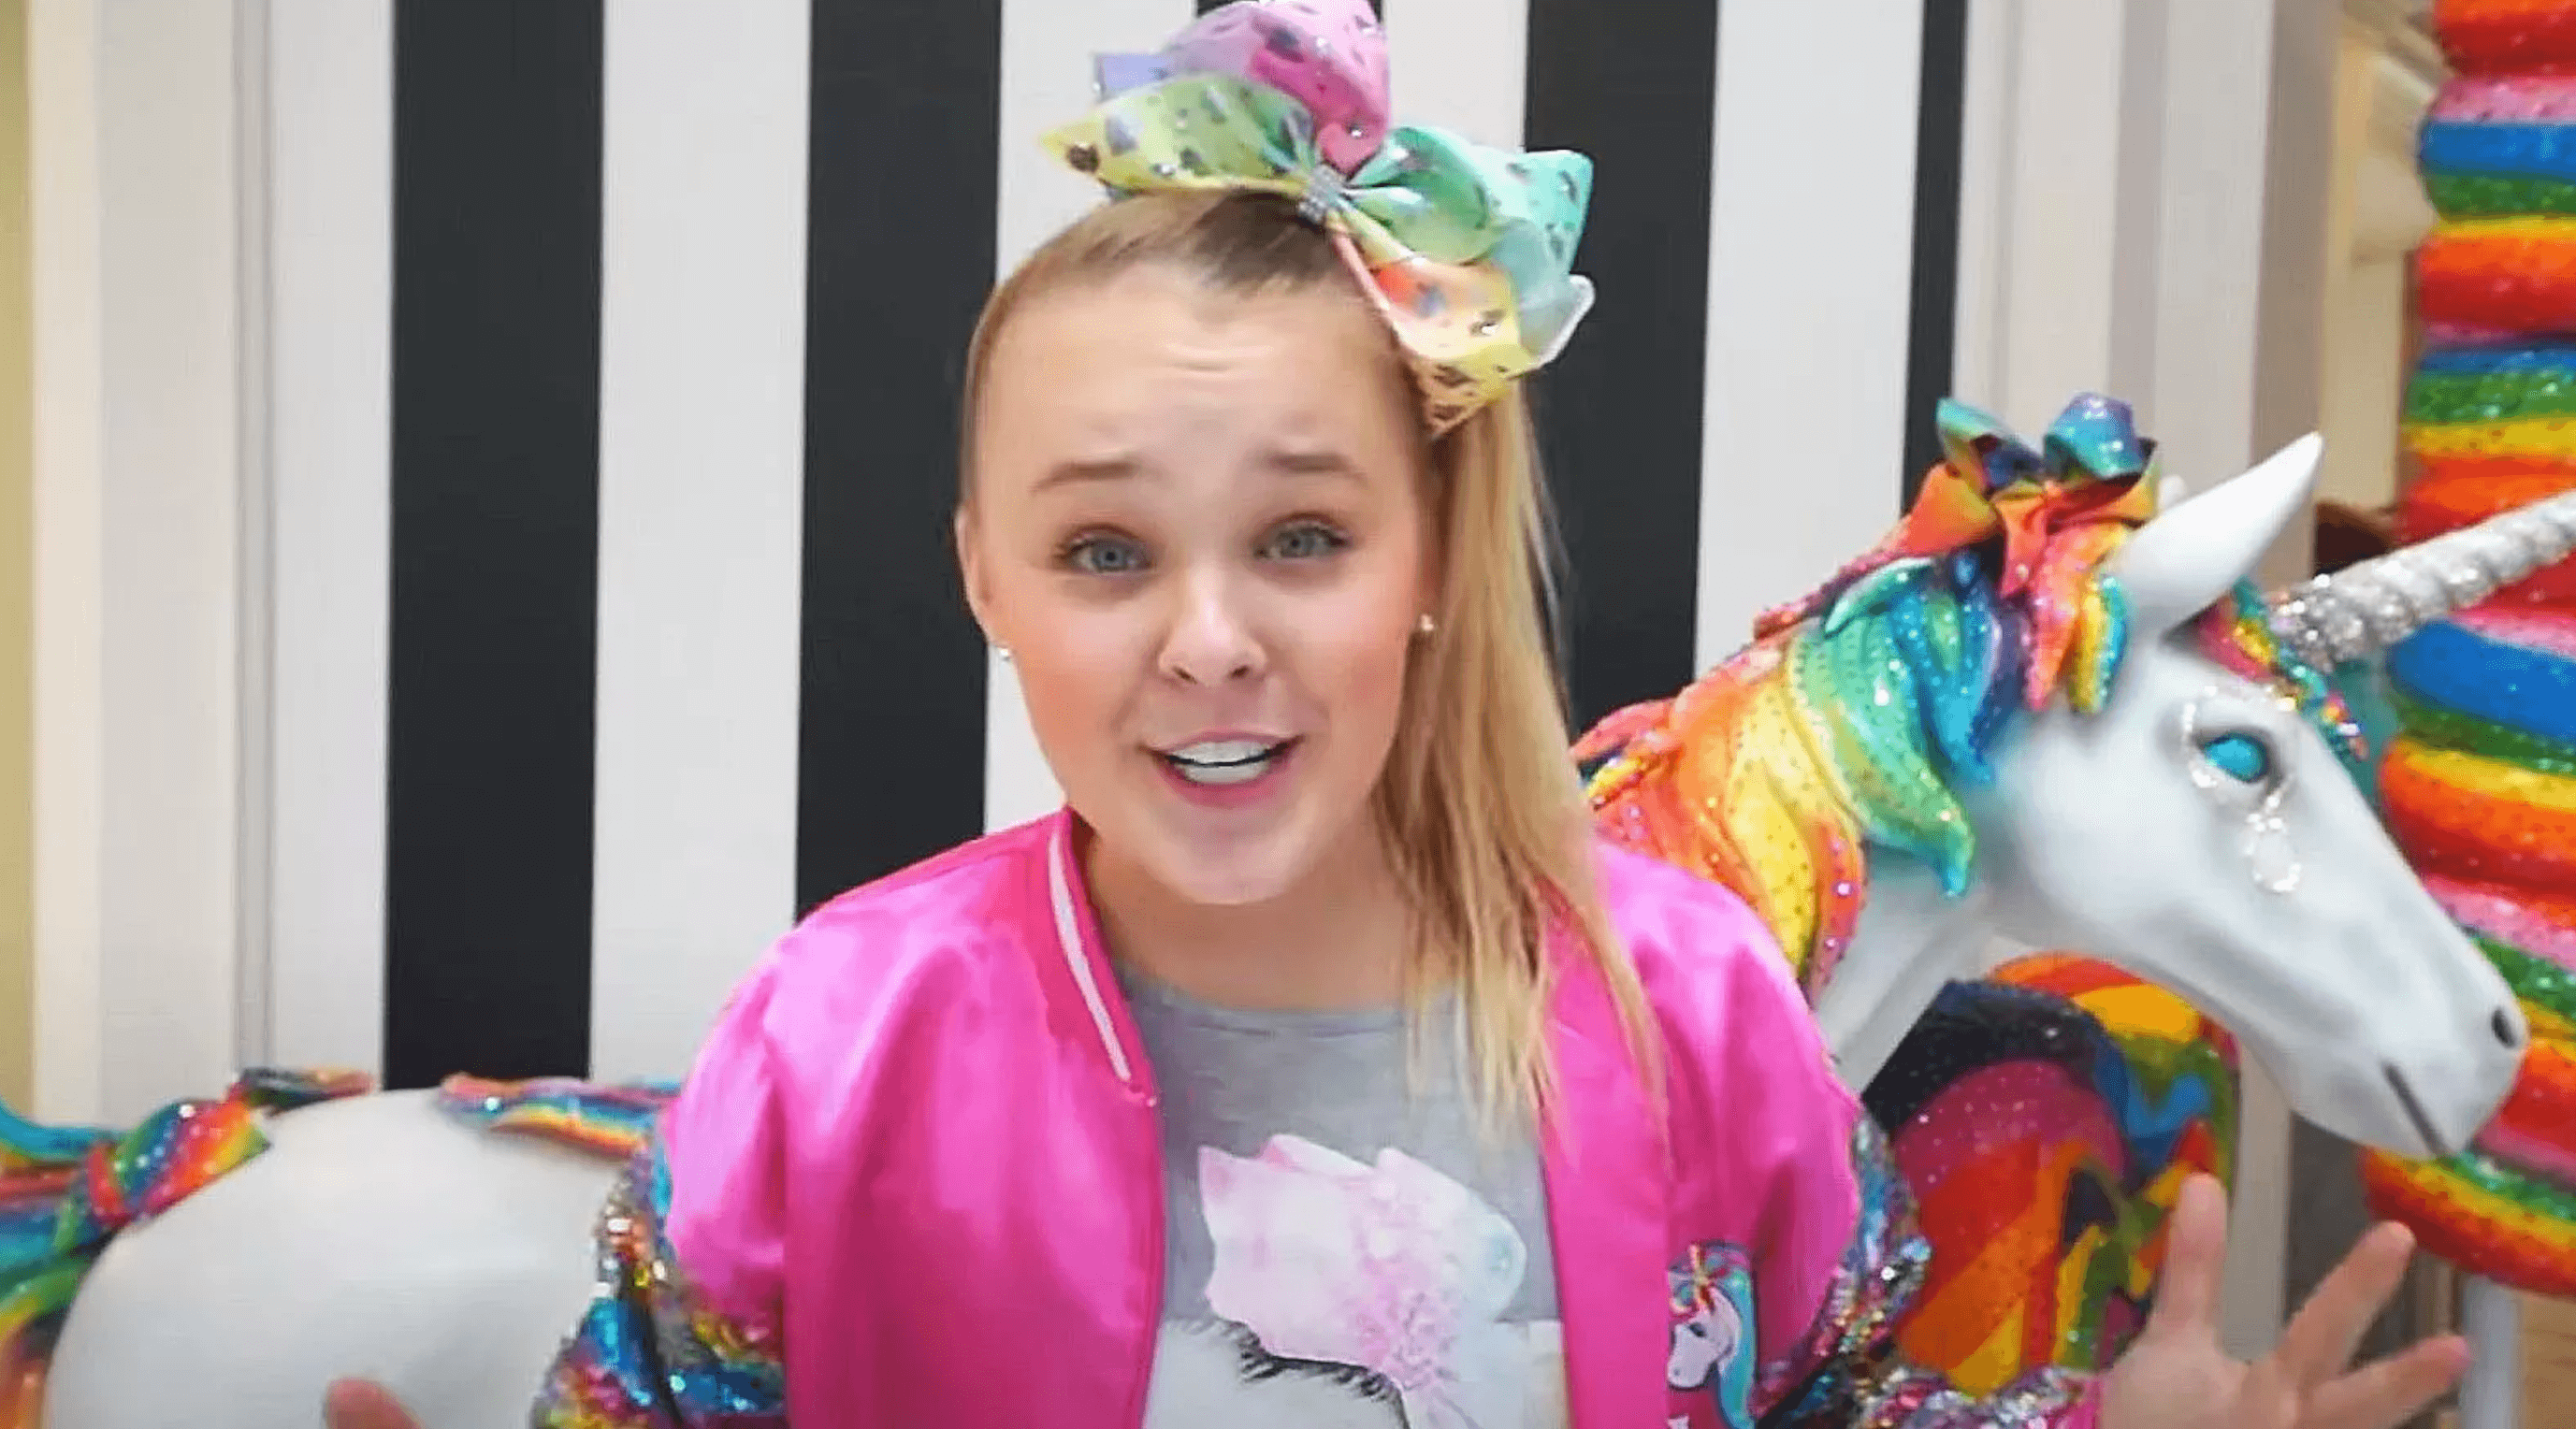 JoJo Siwa Reveals Her House Was Swatted Just Hours After She Came Out On Twitter!